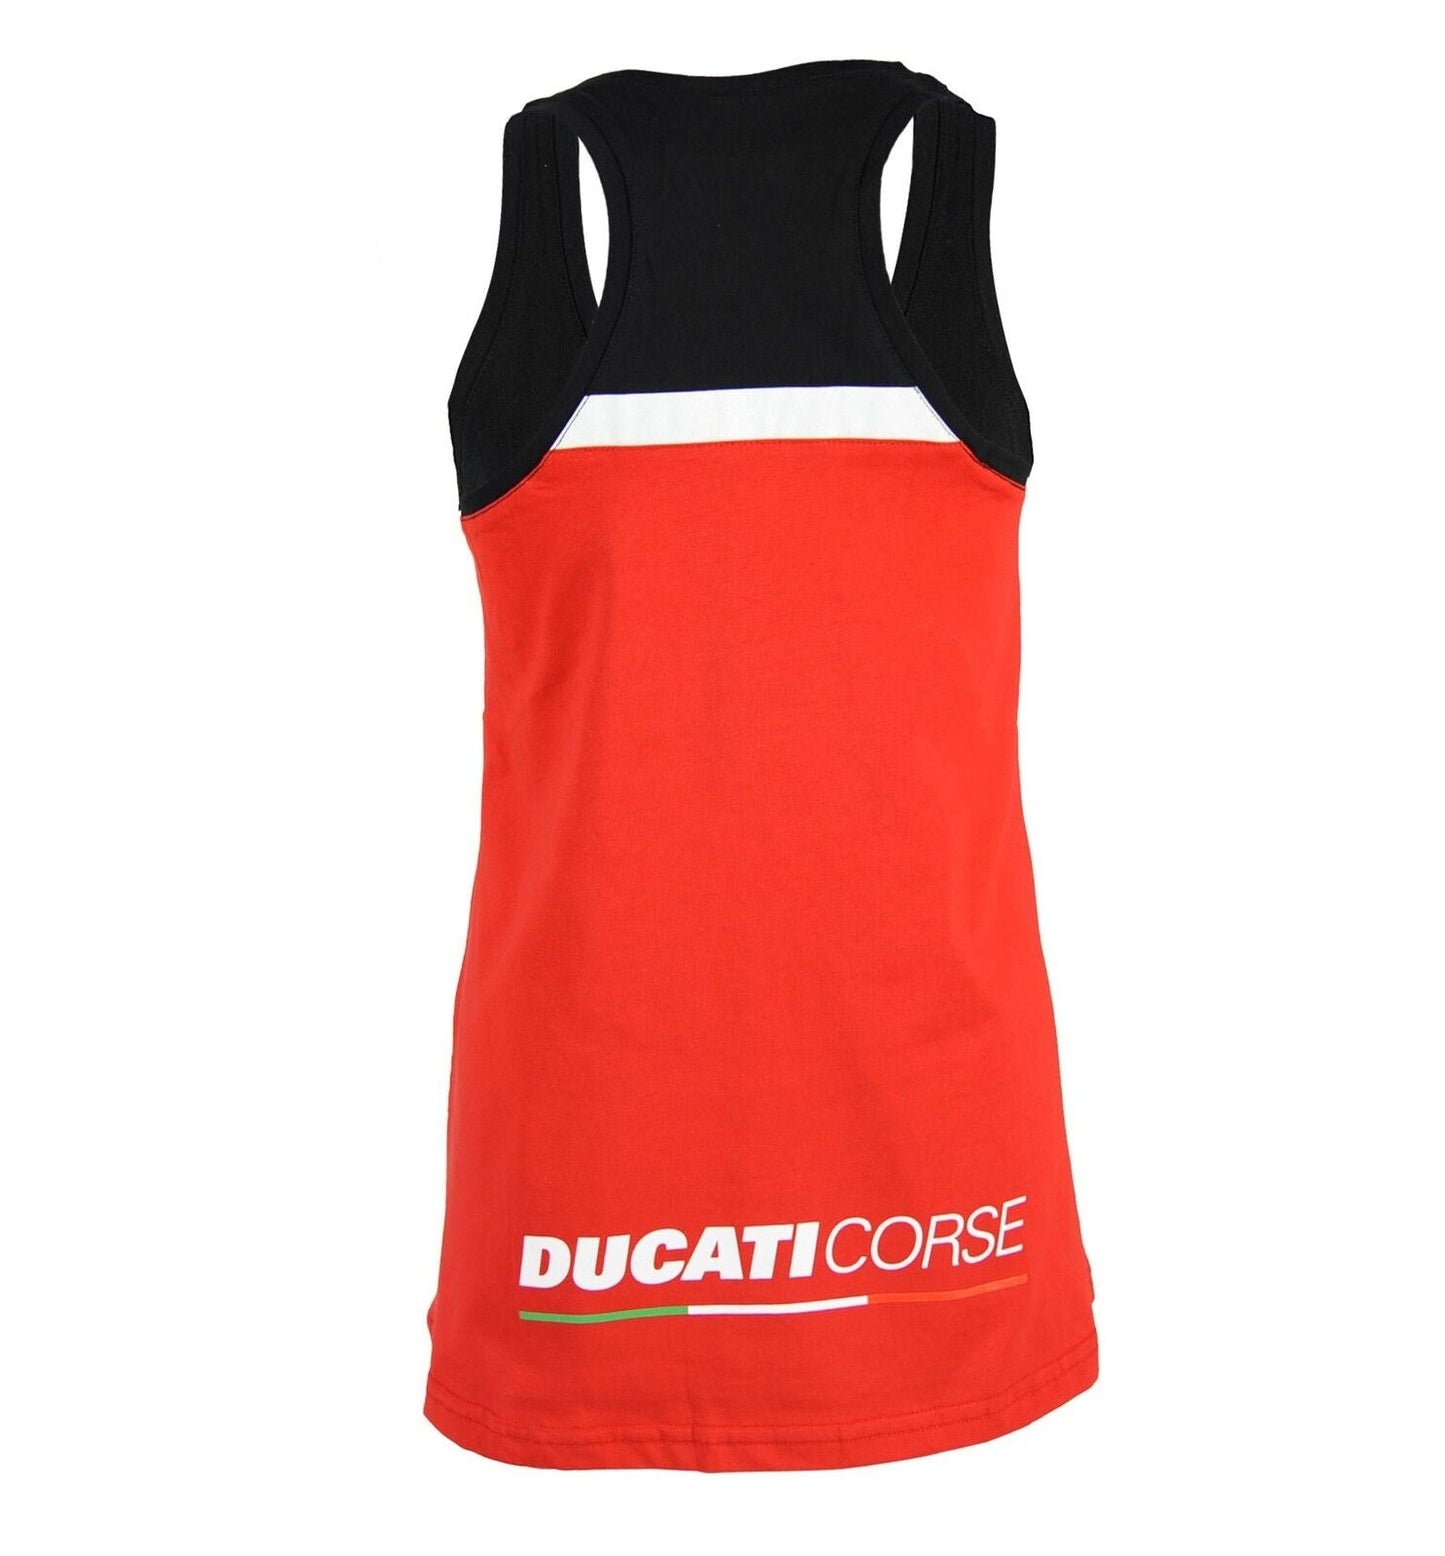 New Official Ducati Corse Womans Tank Top T'Shirt